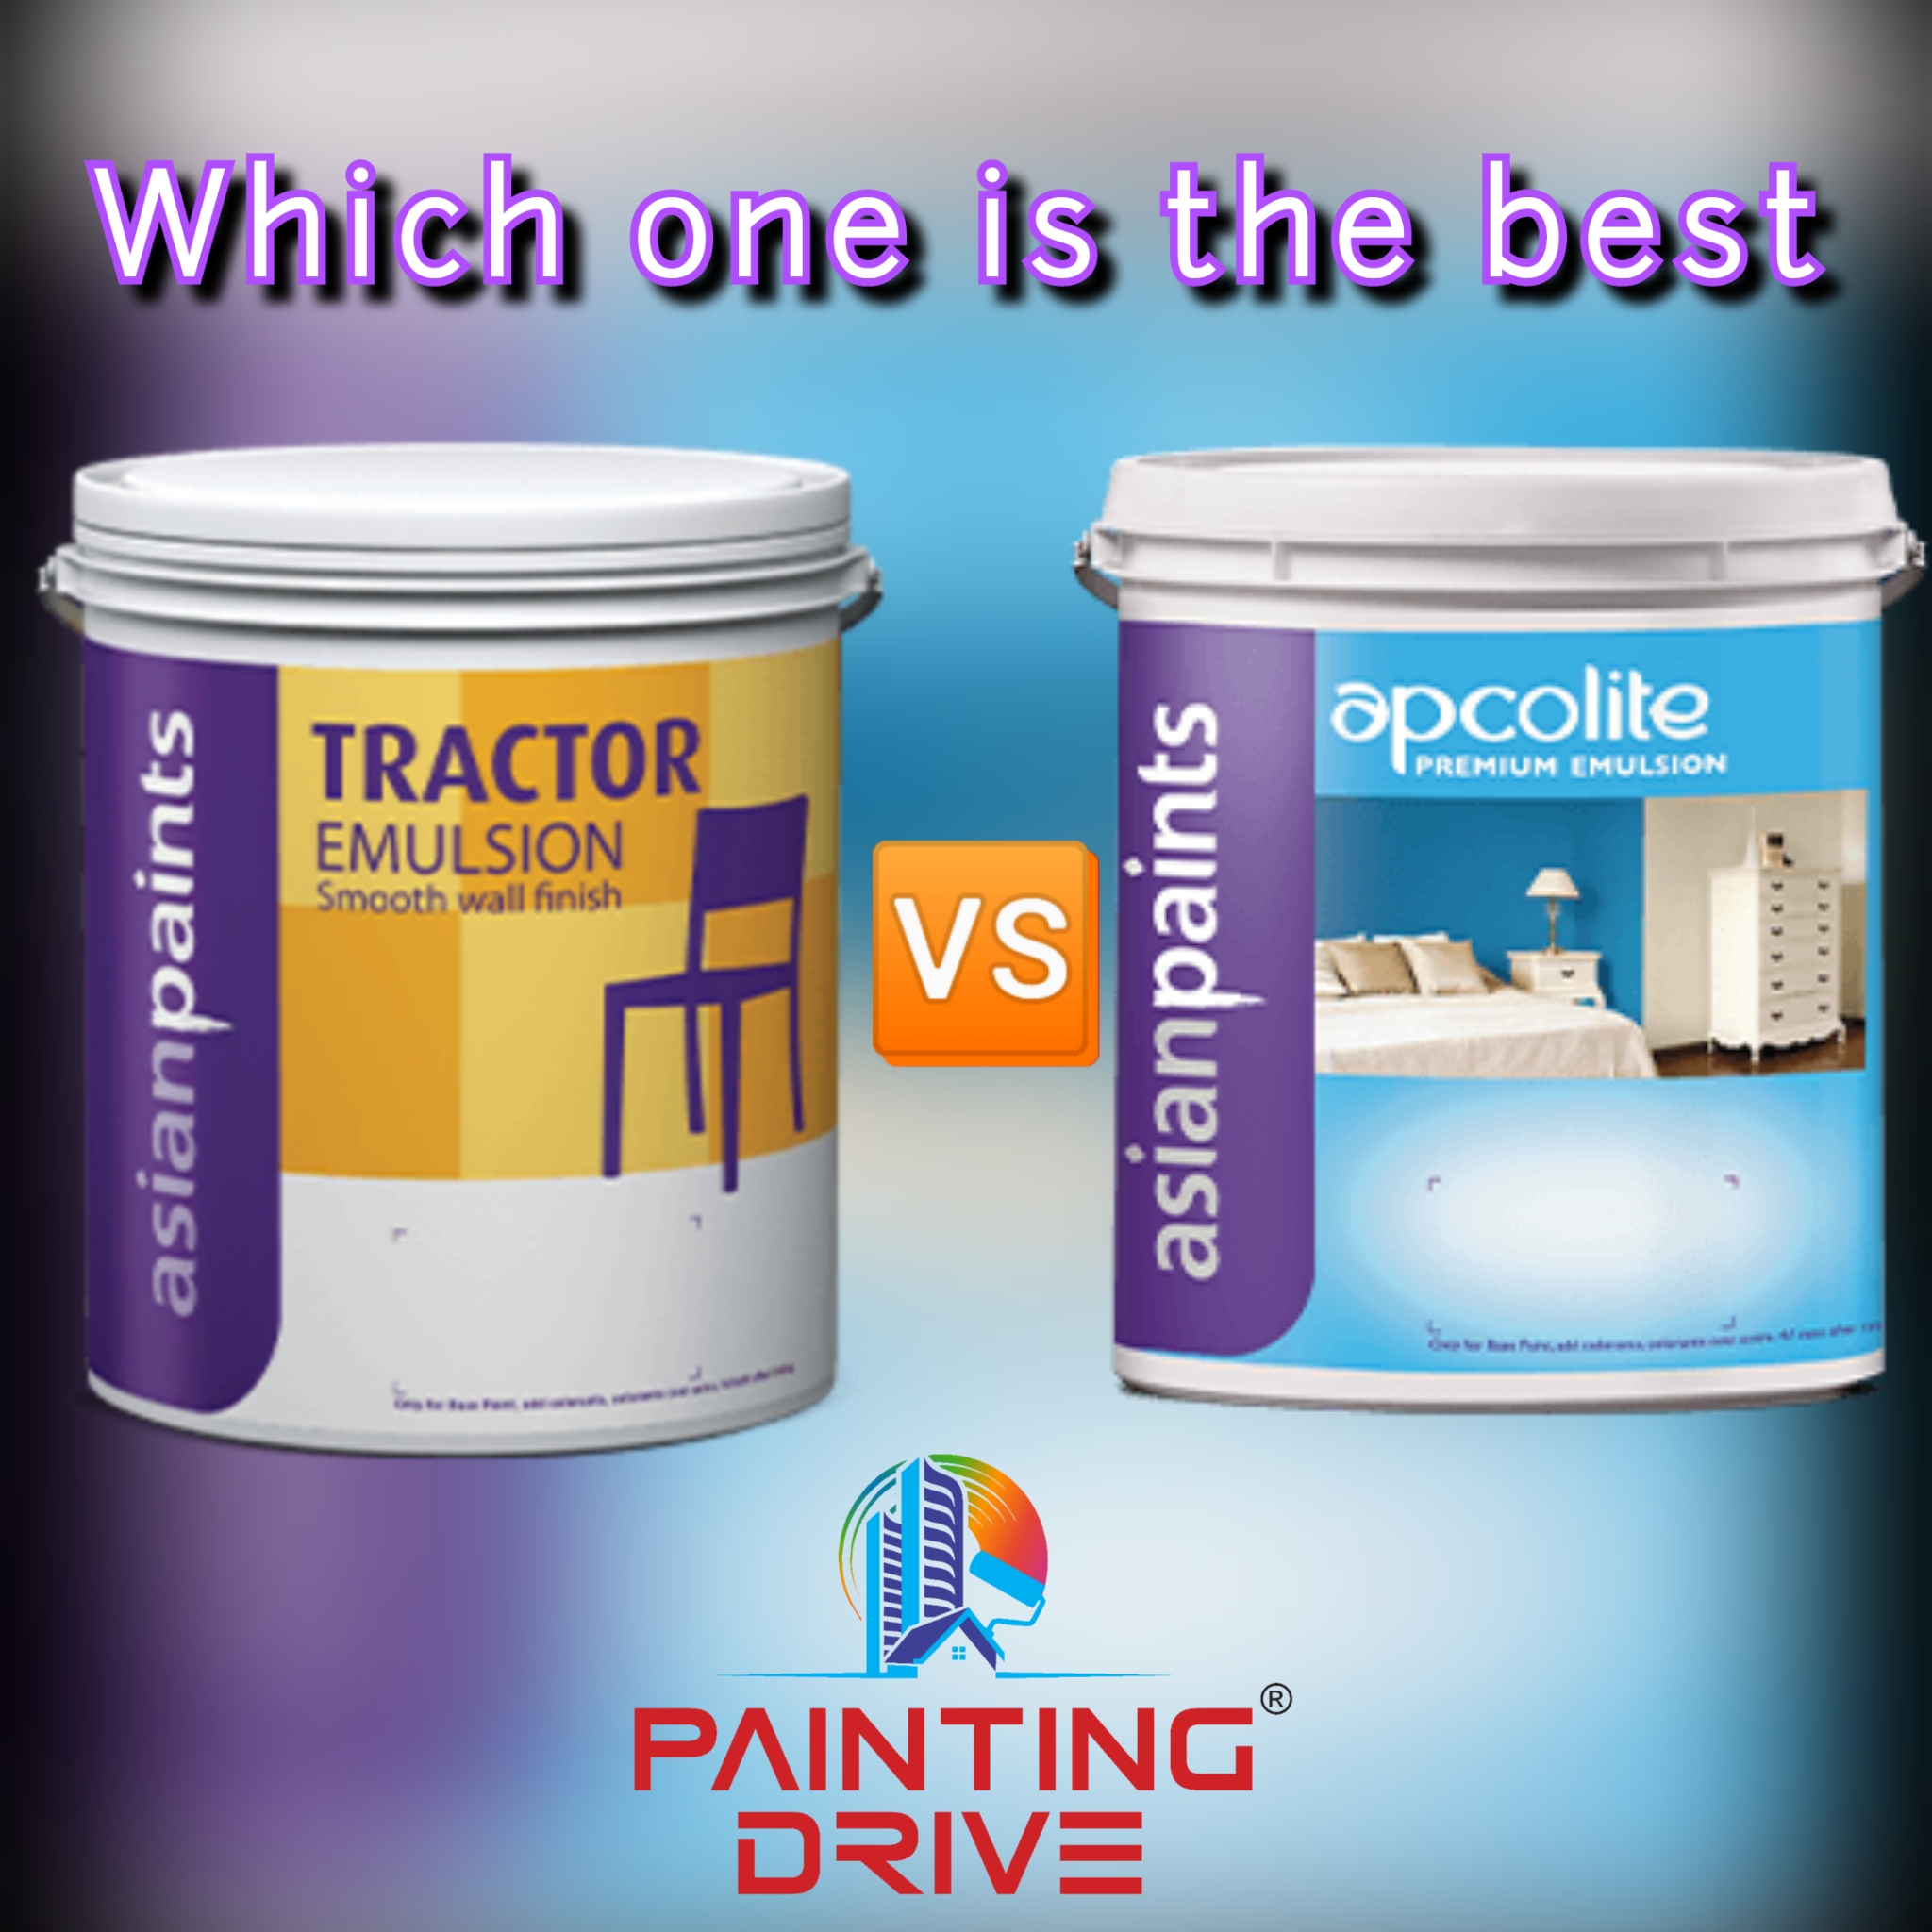 Asian Paints Tractor Emulsion or Asian Premium Emulsion: which is better?